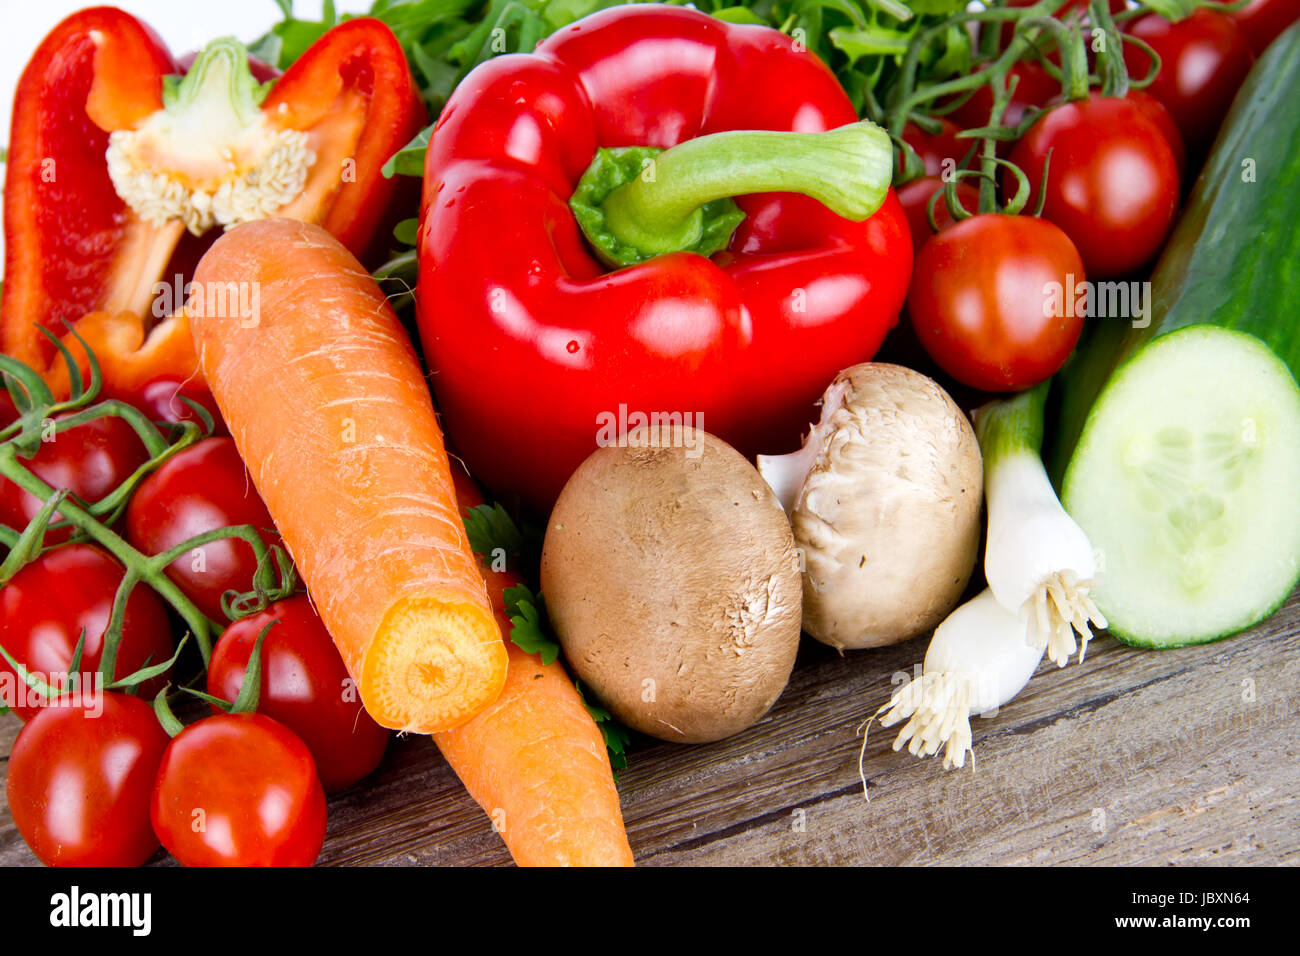 various vegetables Stock Photo